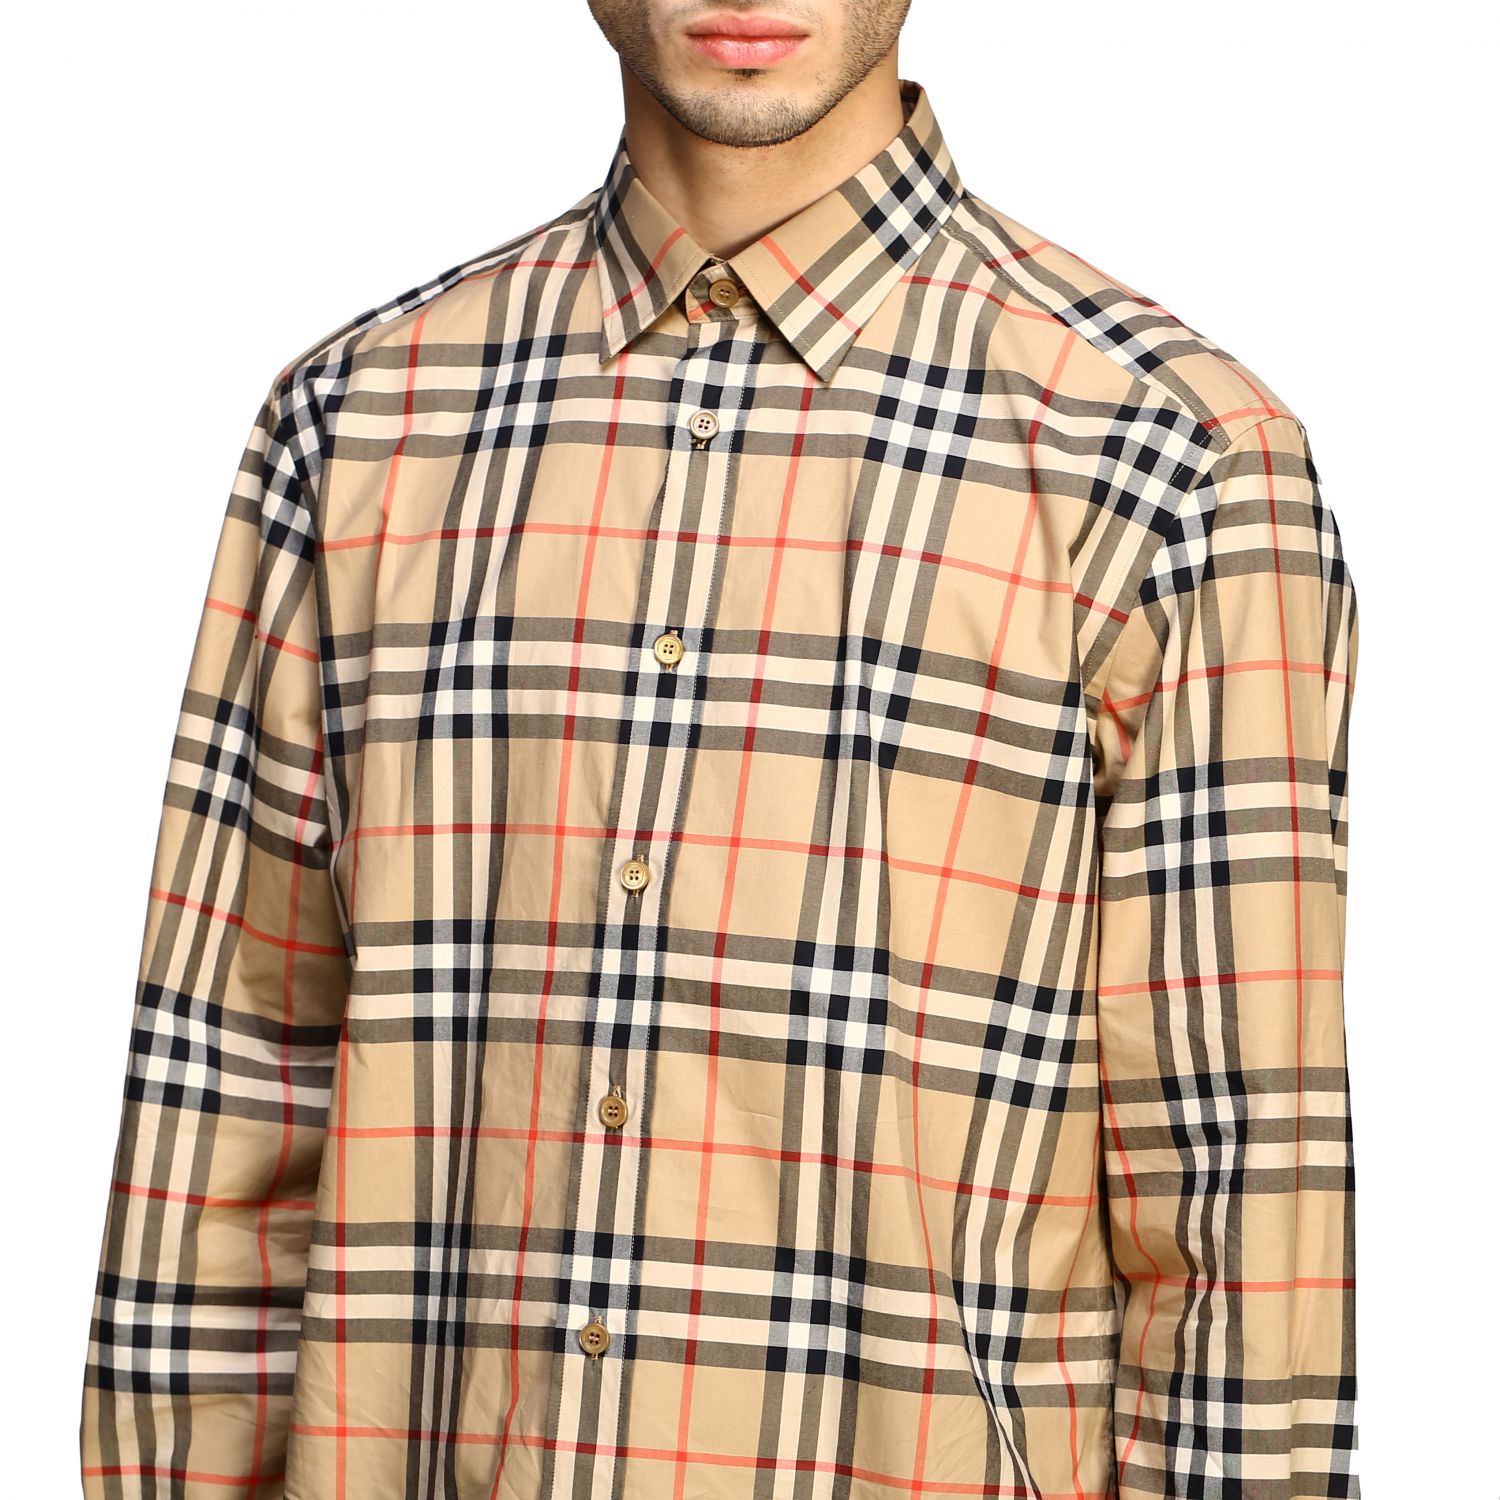 Burberry Outlet: long-sleeved shirt with check print - Beige | Shirt